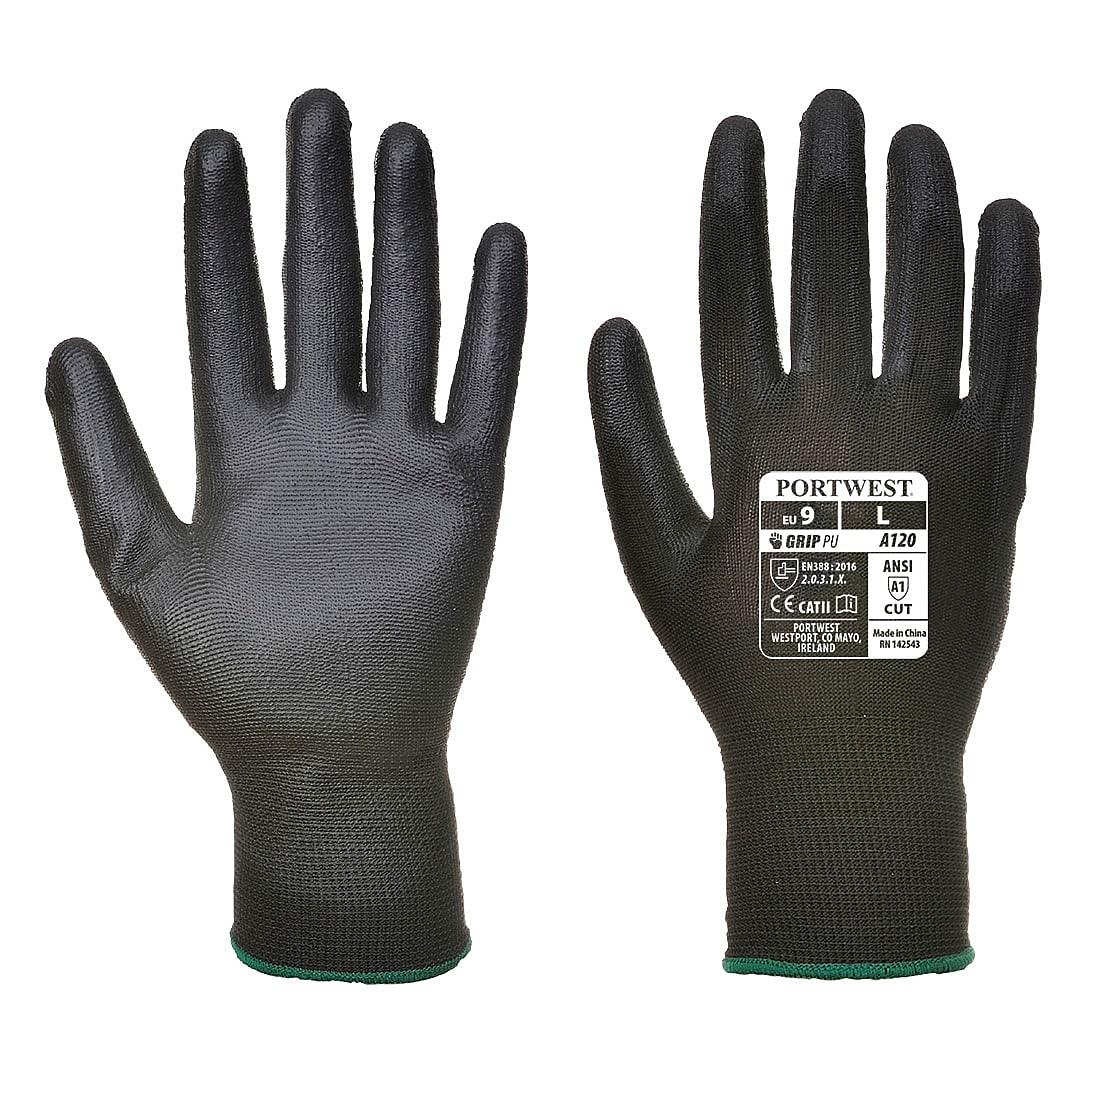 Portwest PU Palm Gloves in Black (Product Code: A120)